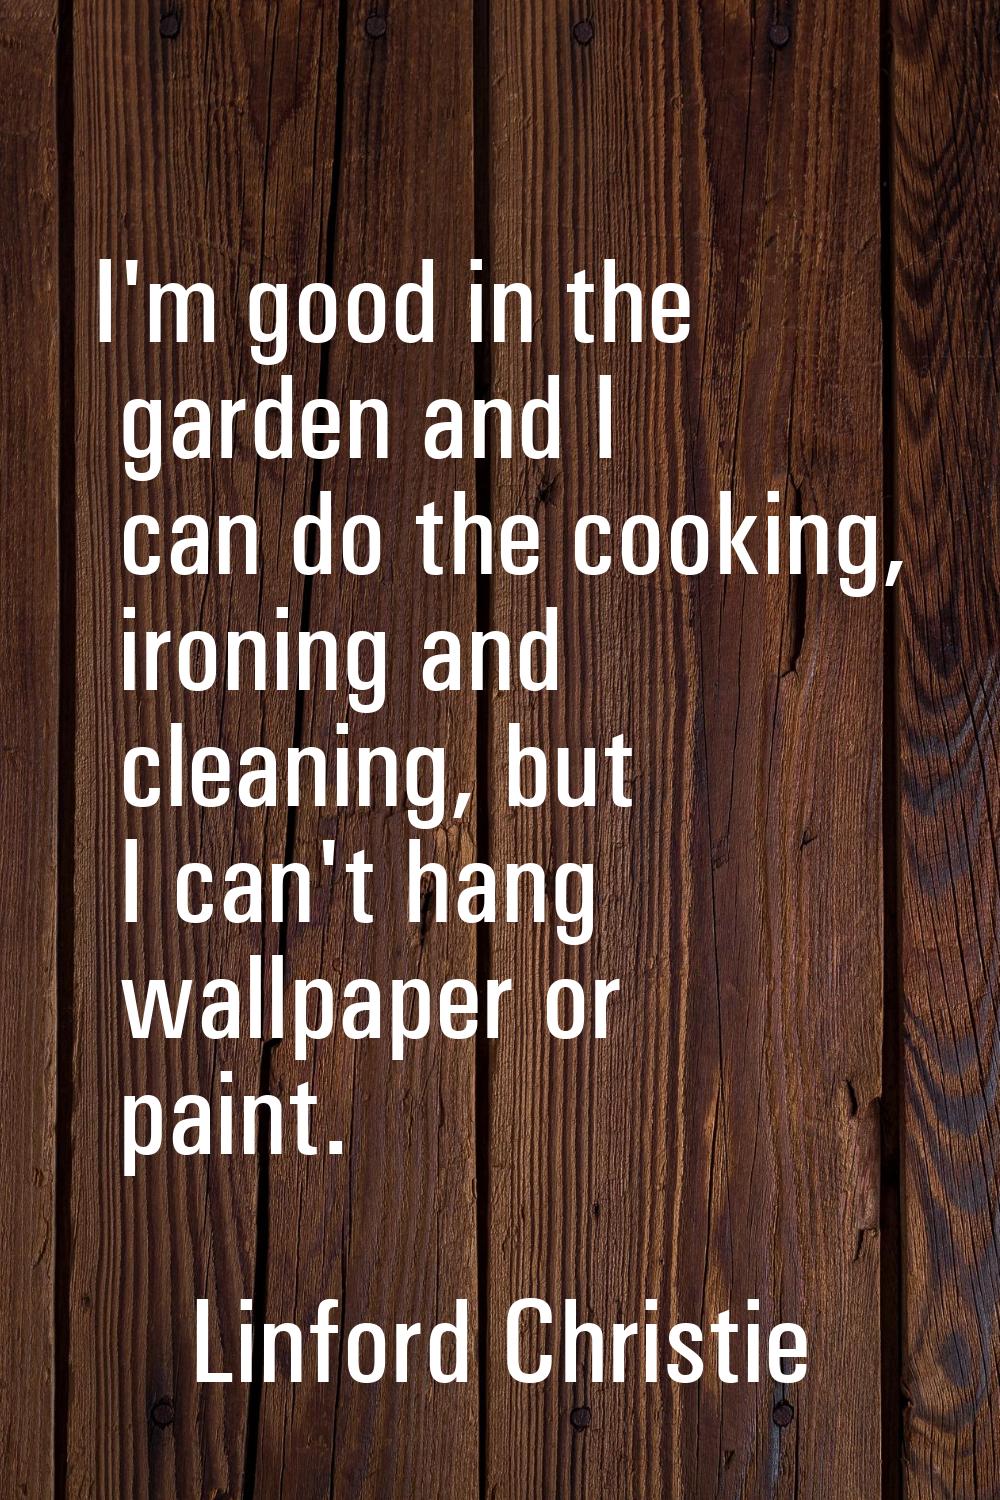 I'm good in the garden and I can do the cooking, ironing and cleaning, but I can't hang wallpaper o